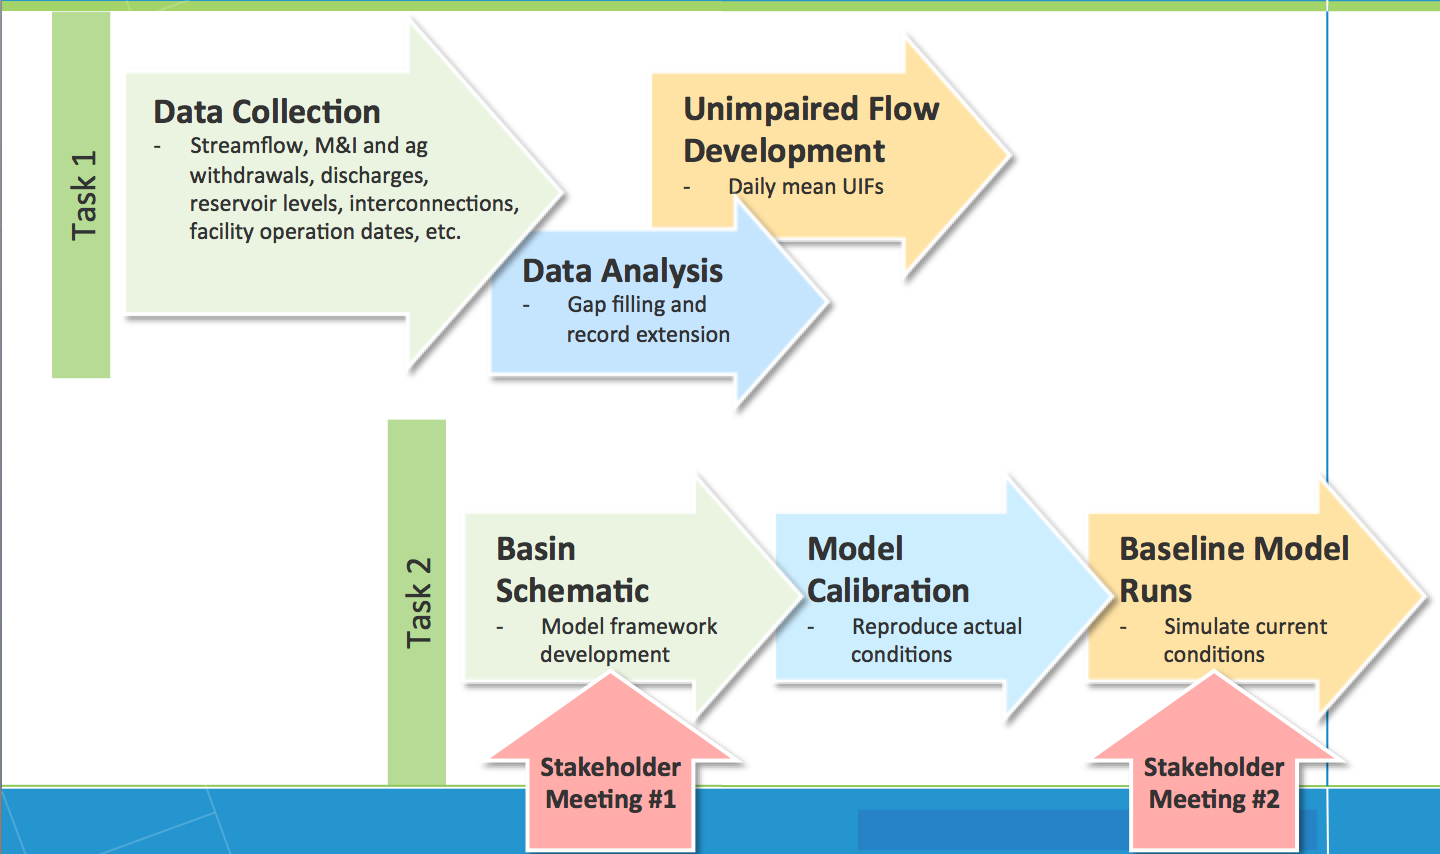 Simplified Water Allocation Model process as described above